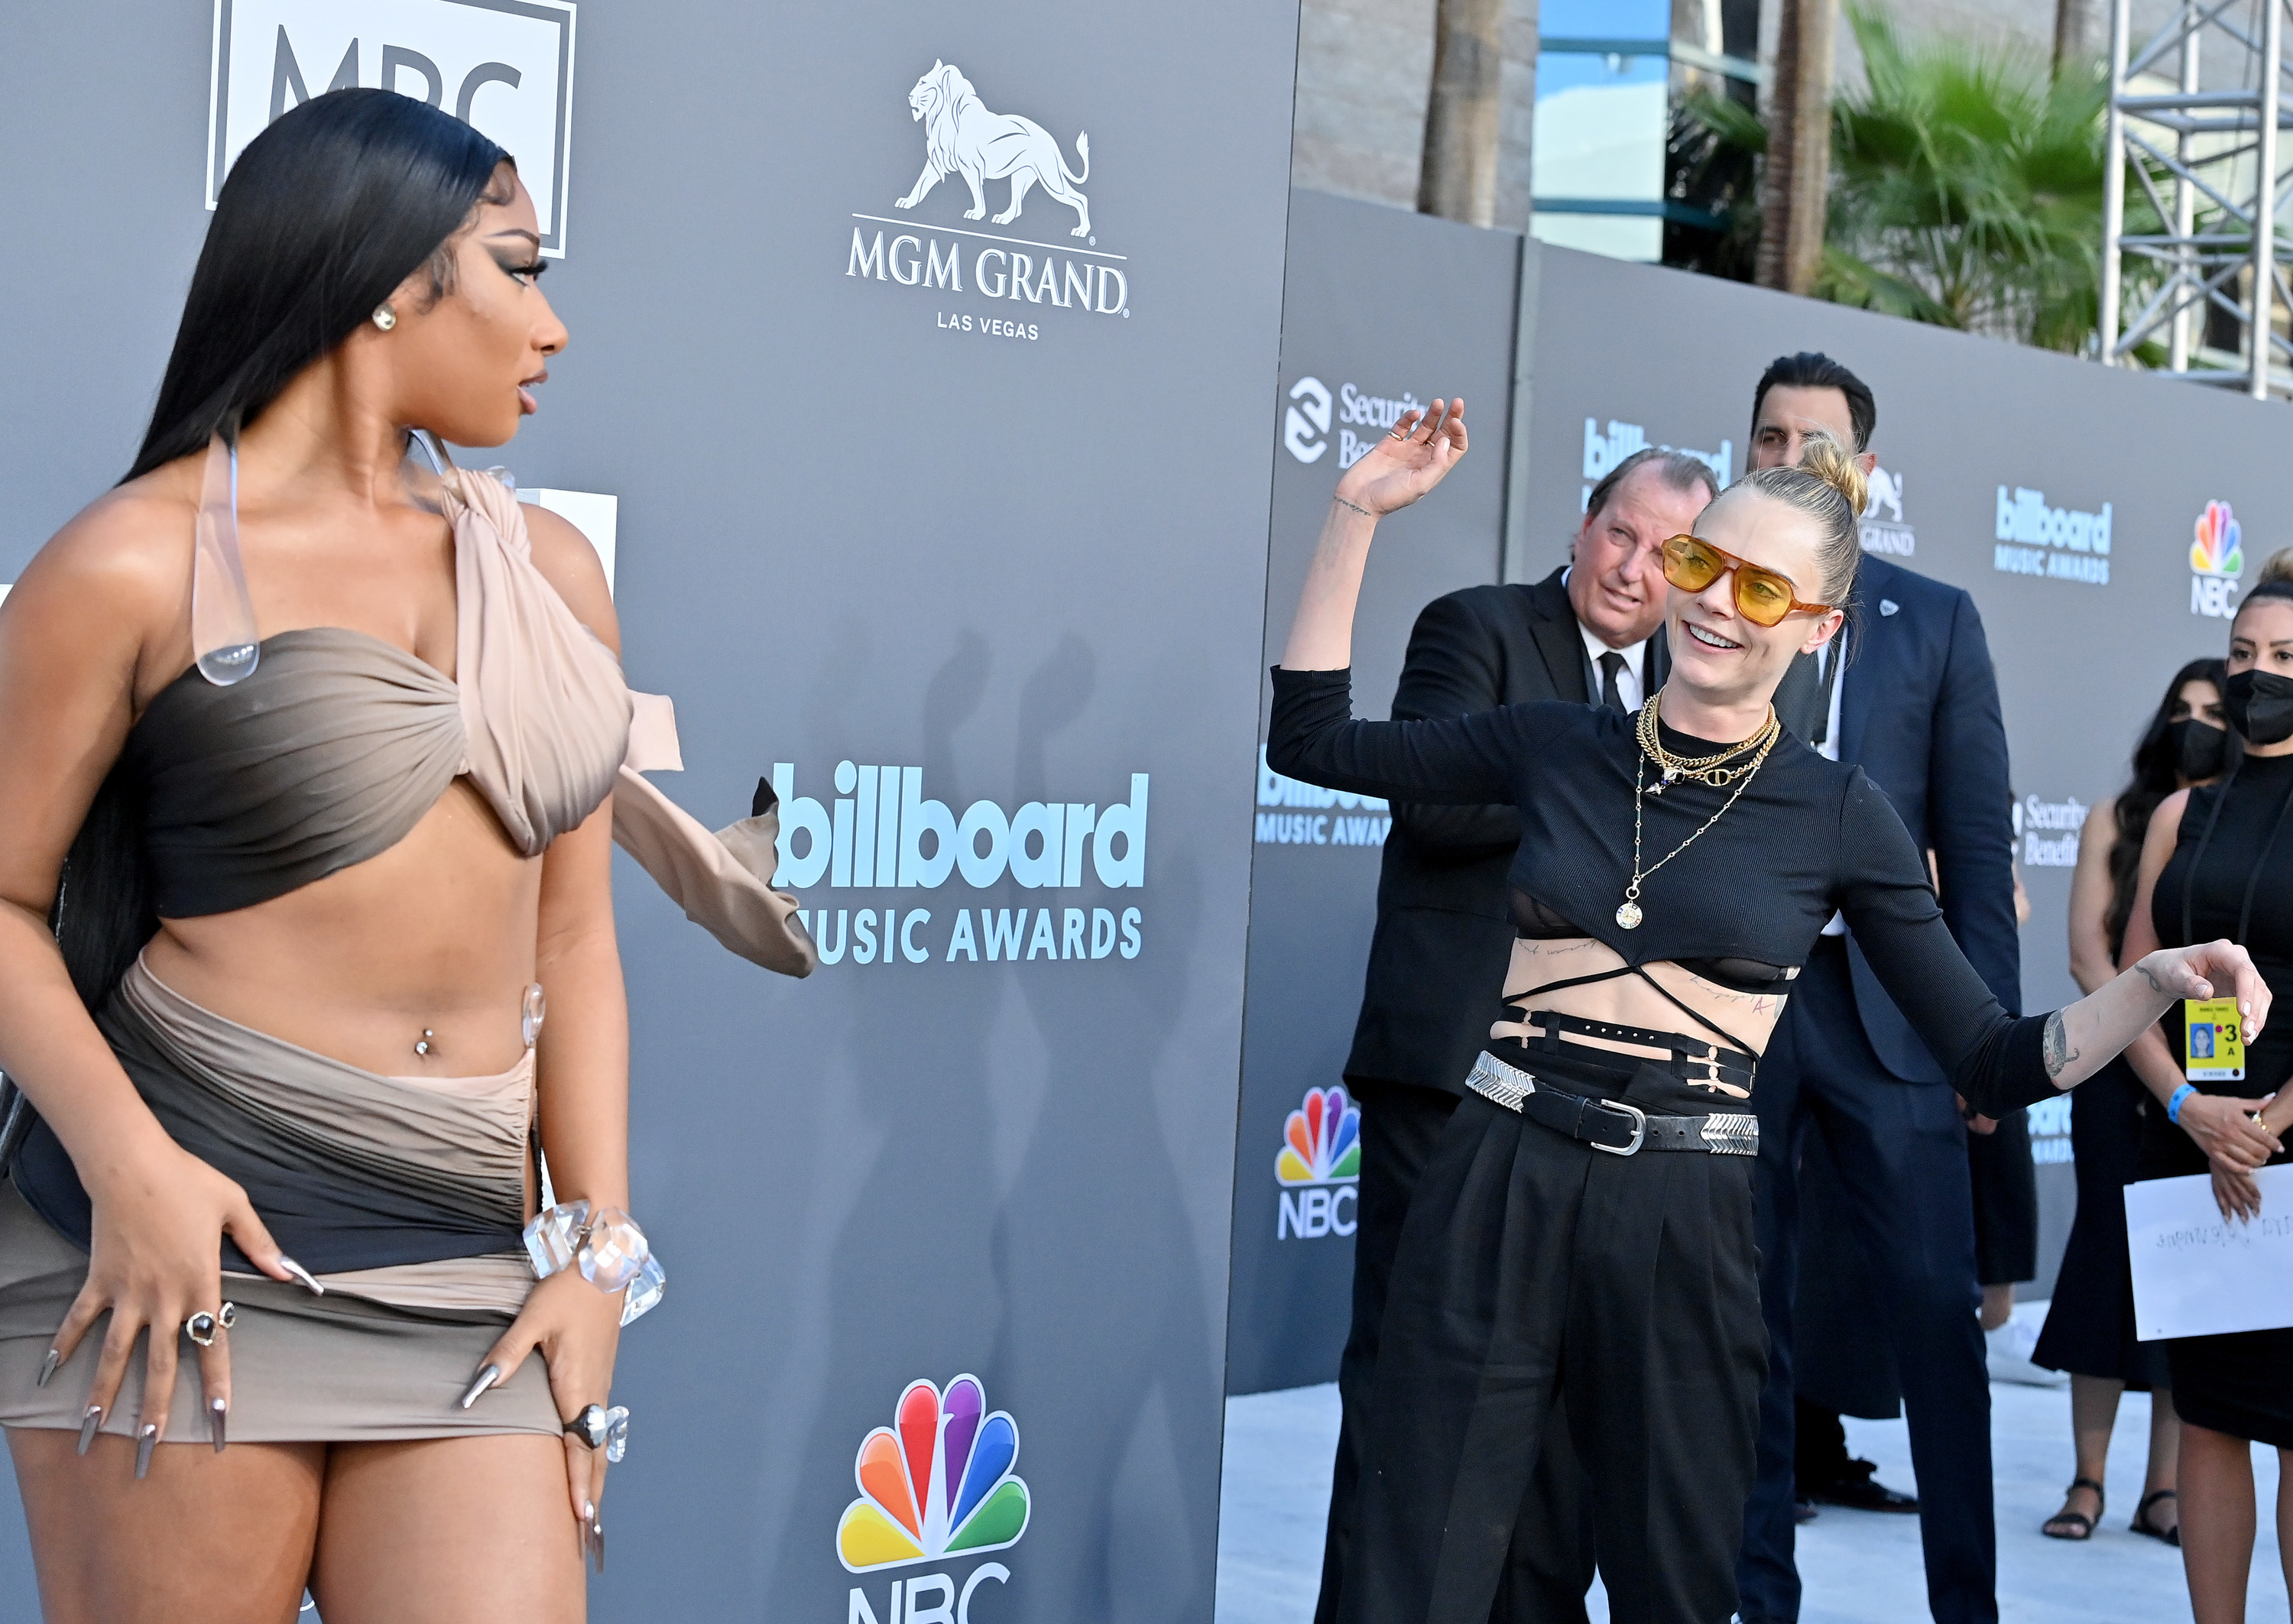 Cara Delevingne is standing on the Billboard awards blue carpet, smiling with her arms up while looking at Megan Thee Stallion